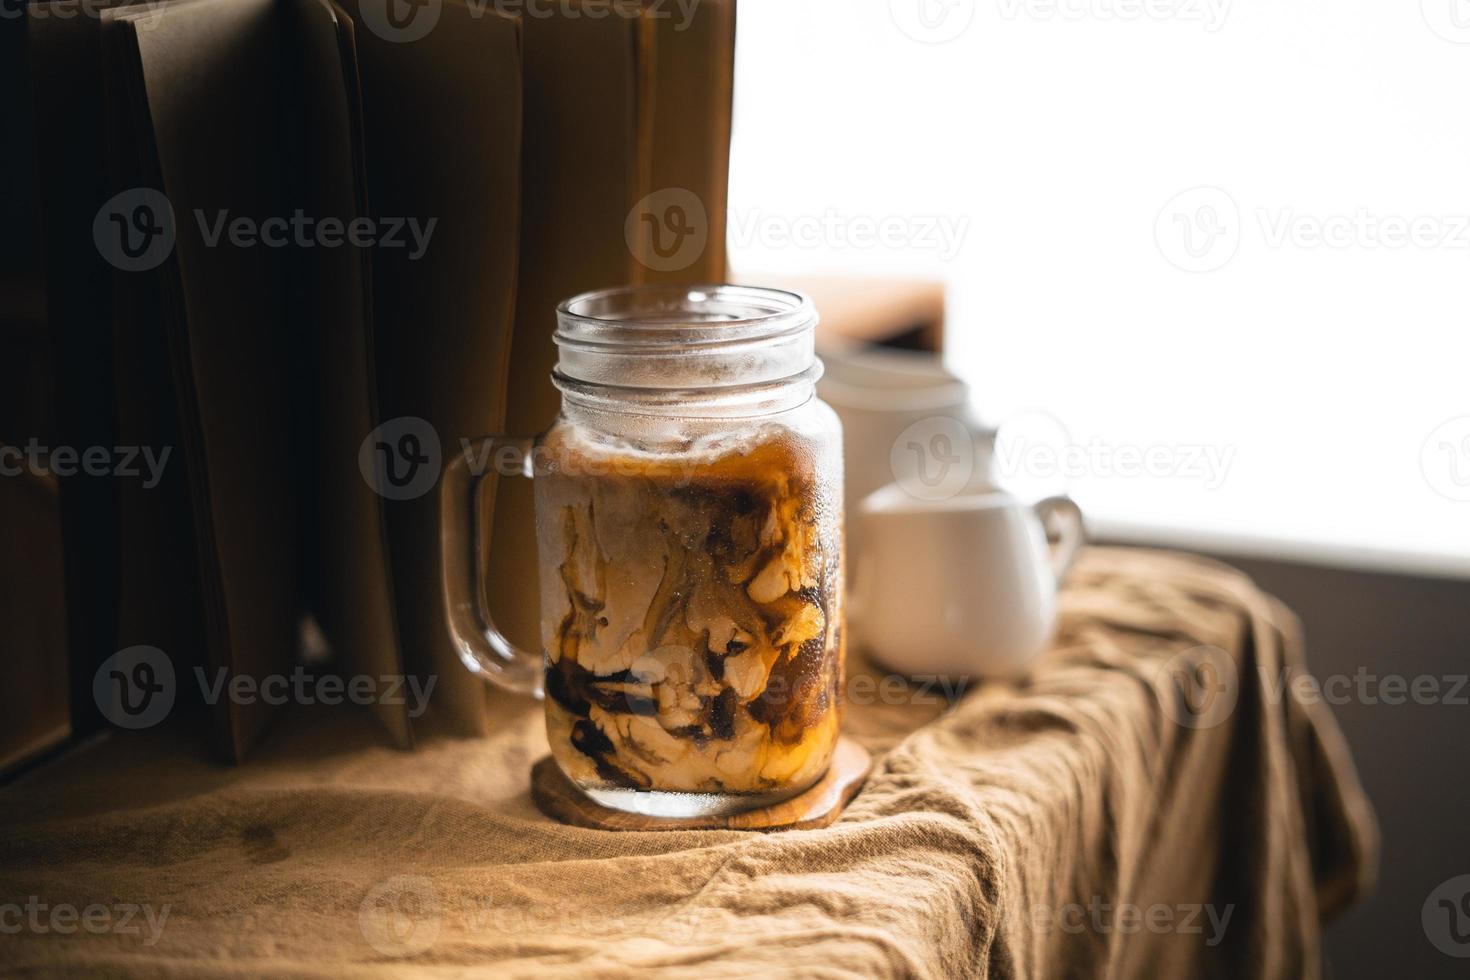 Iced coffee iced latte on table in home photo